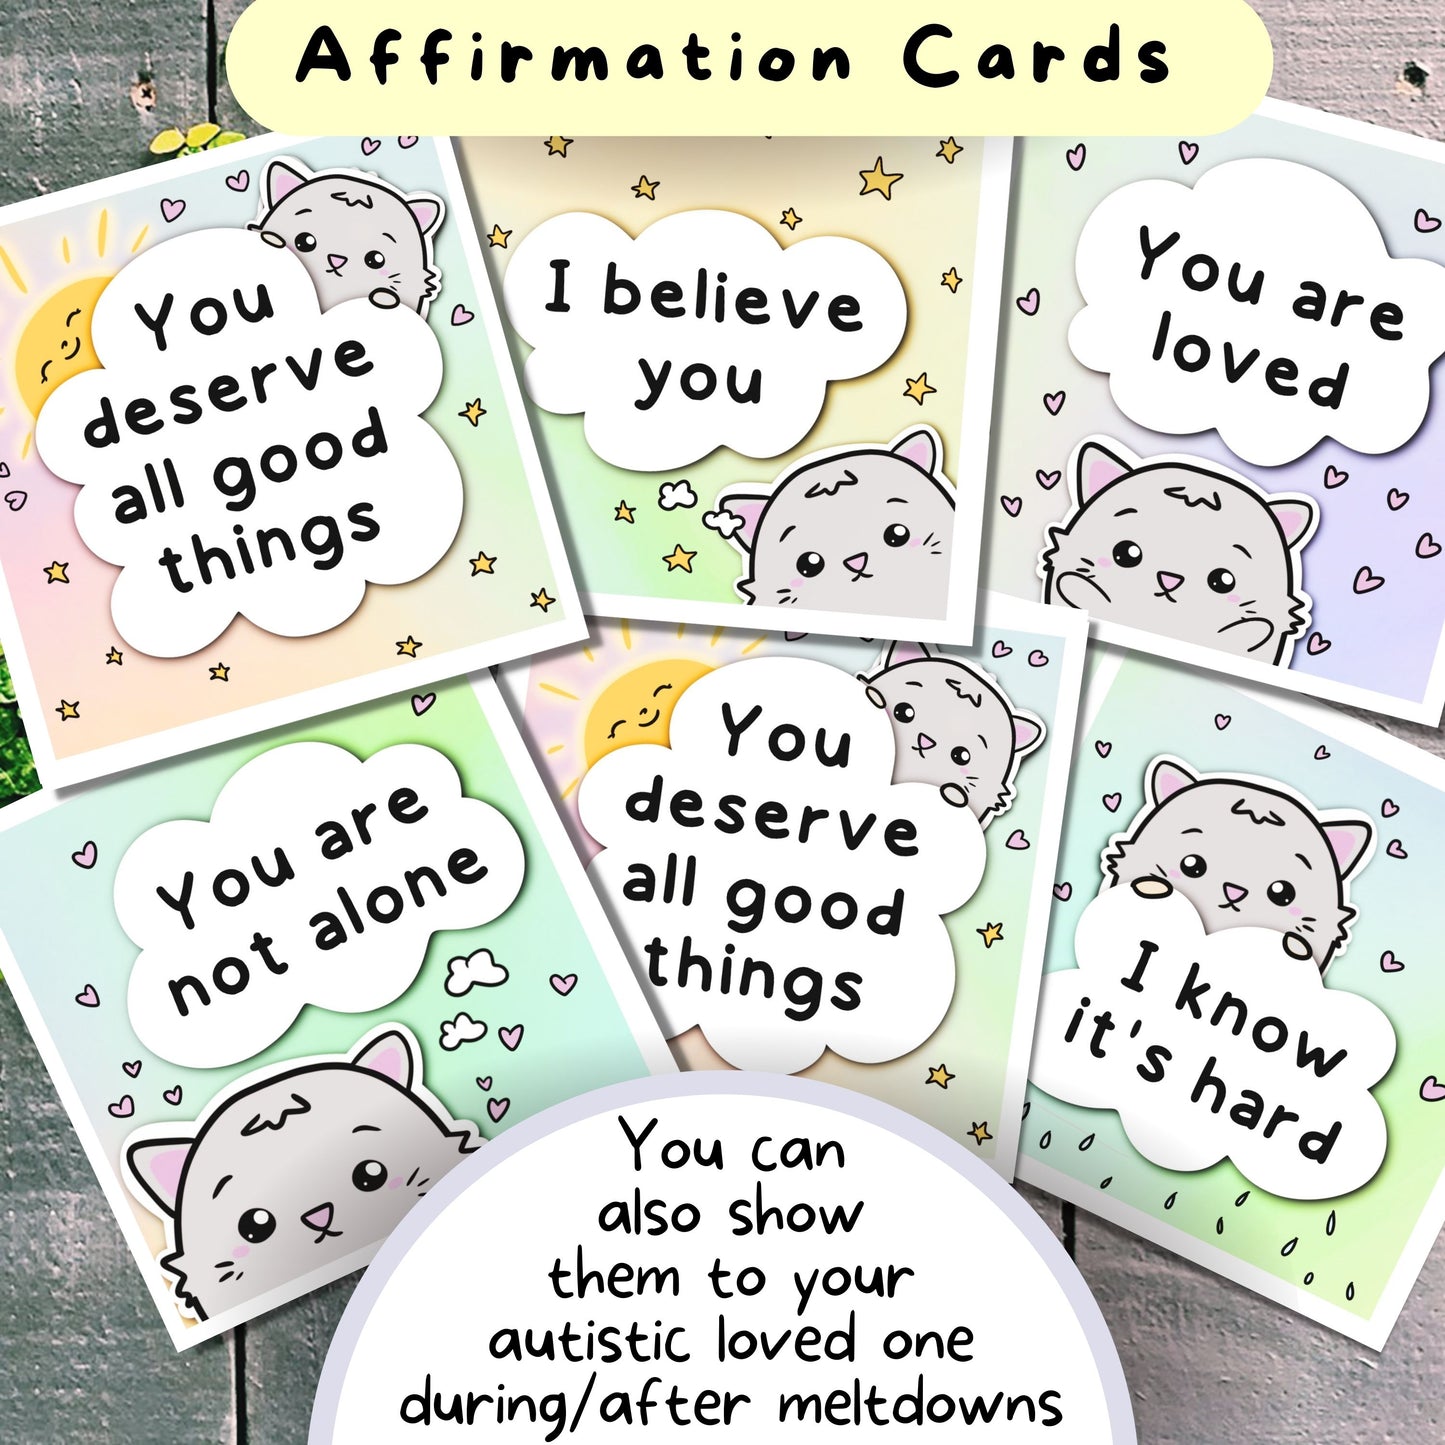 Kawaii Cat-Themed Communication Cards and Affirmation Cards, Hidden Disability Cards, for people with Selective Mutism, Autism, ADHD, Anxety. The set includes communication cards for autistic meltdowns and shutdowns as well. Hand-drawn by an autistic artist (LiL Penguin Studios)